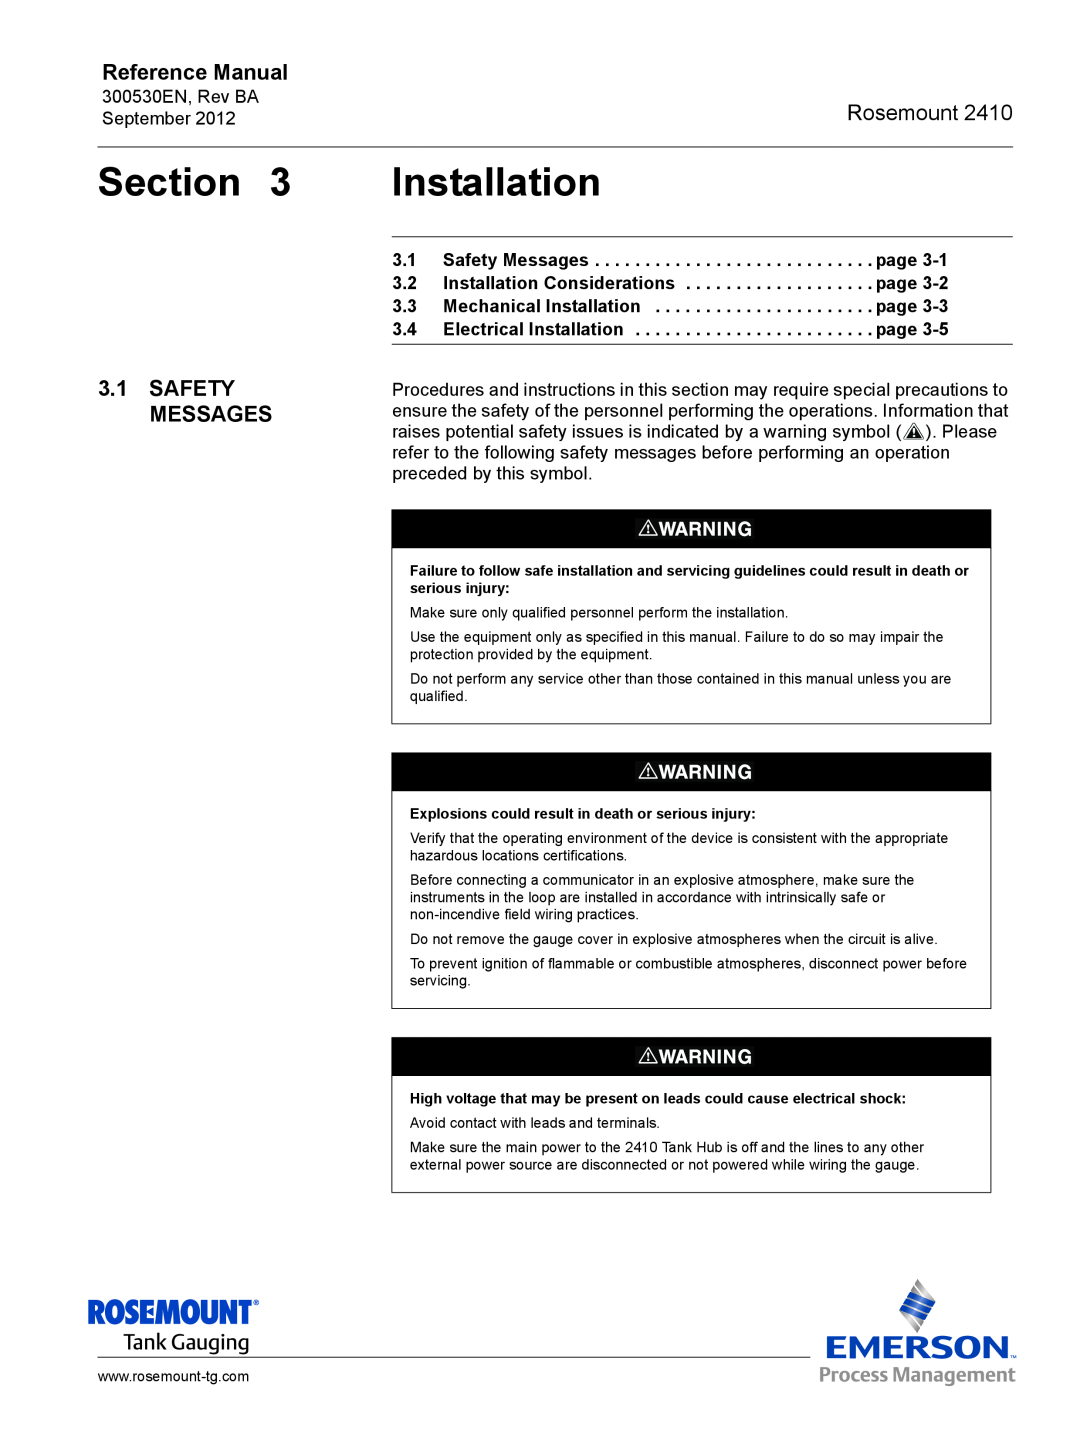 Emerson Process Management Rosemount 2410 manual Safety Messages, Section, Installation, Reference Manual 